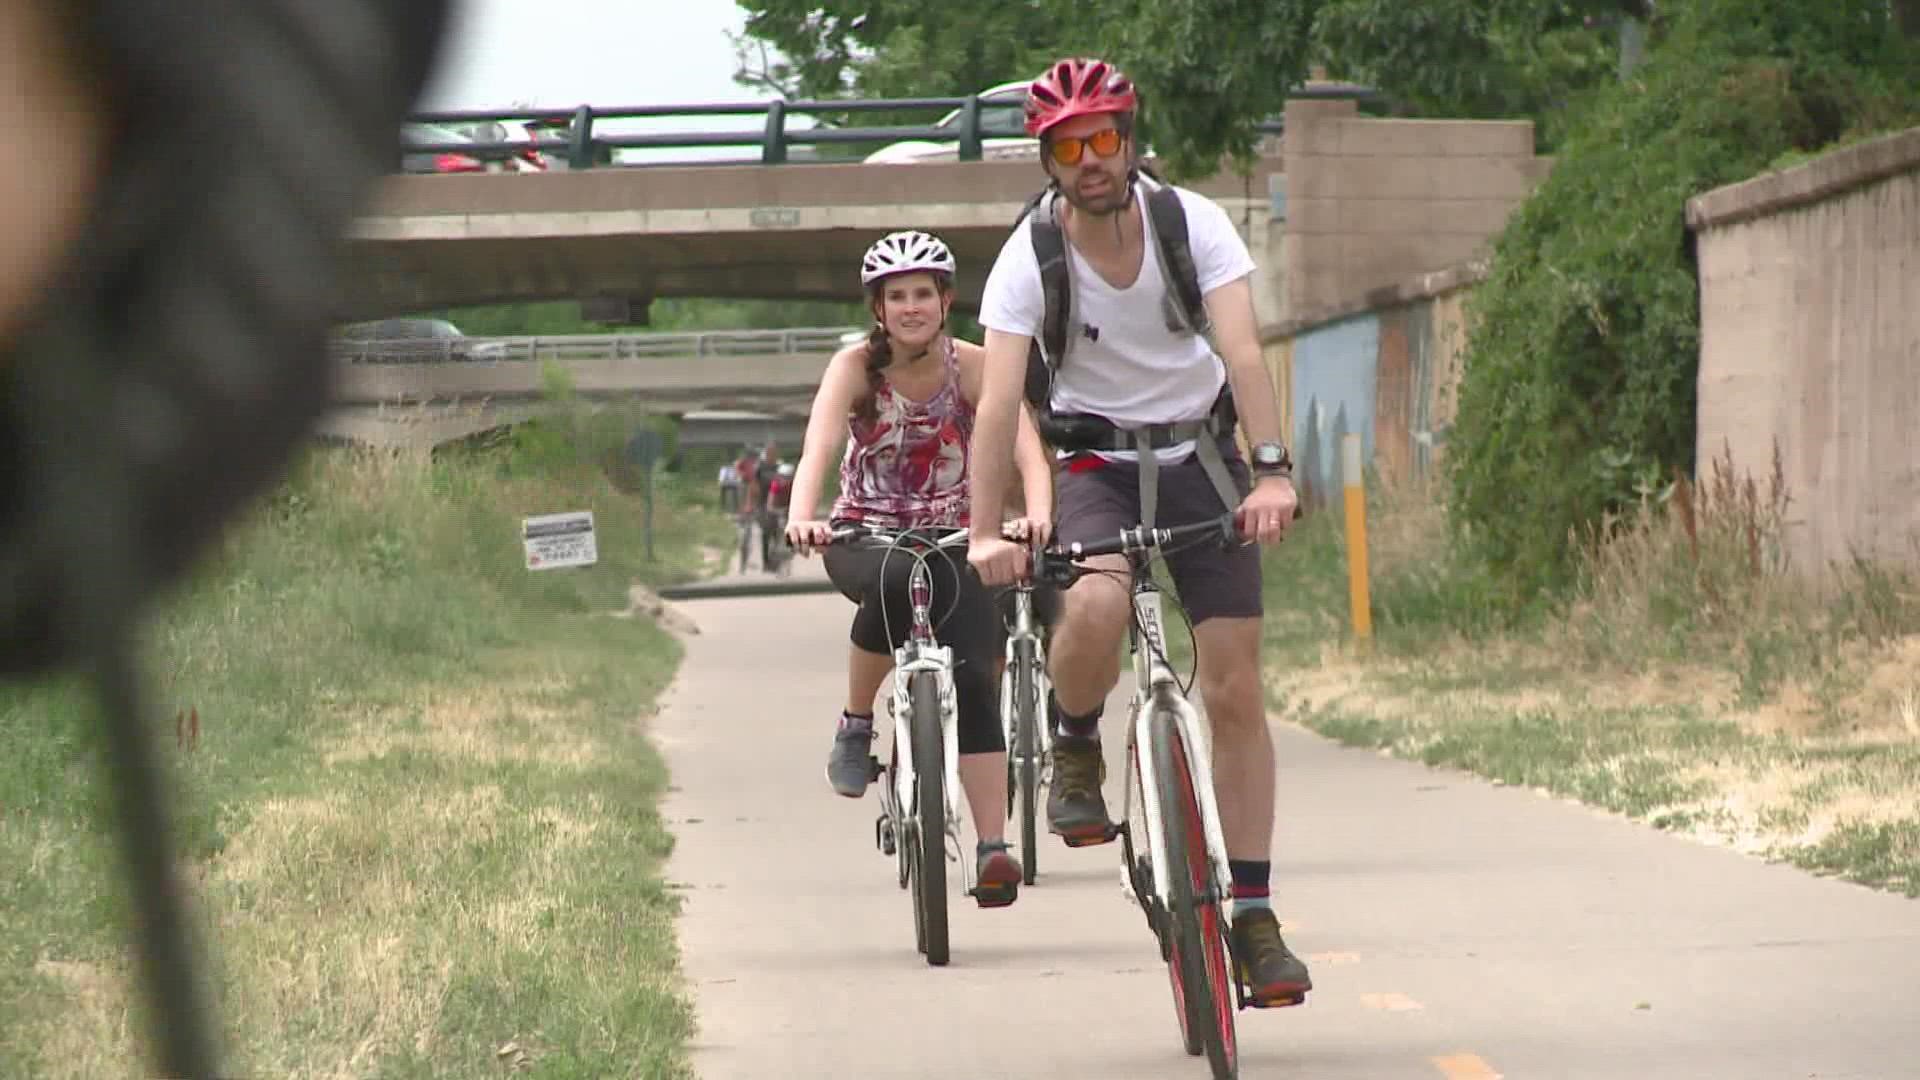 The theme for this year's event is "Shifting Gears," with more than 200 stations around the Denver area.